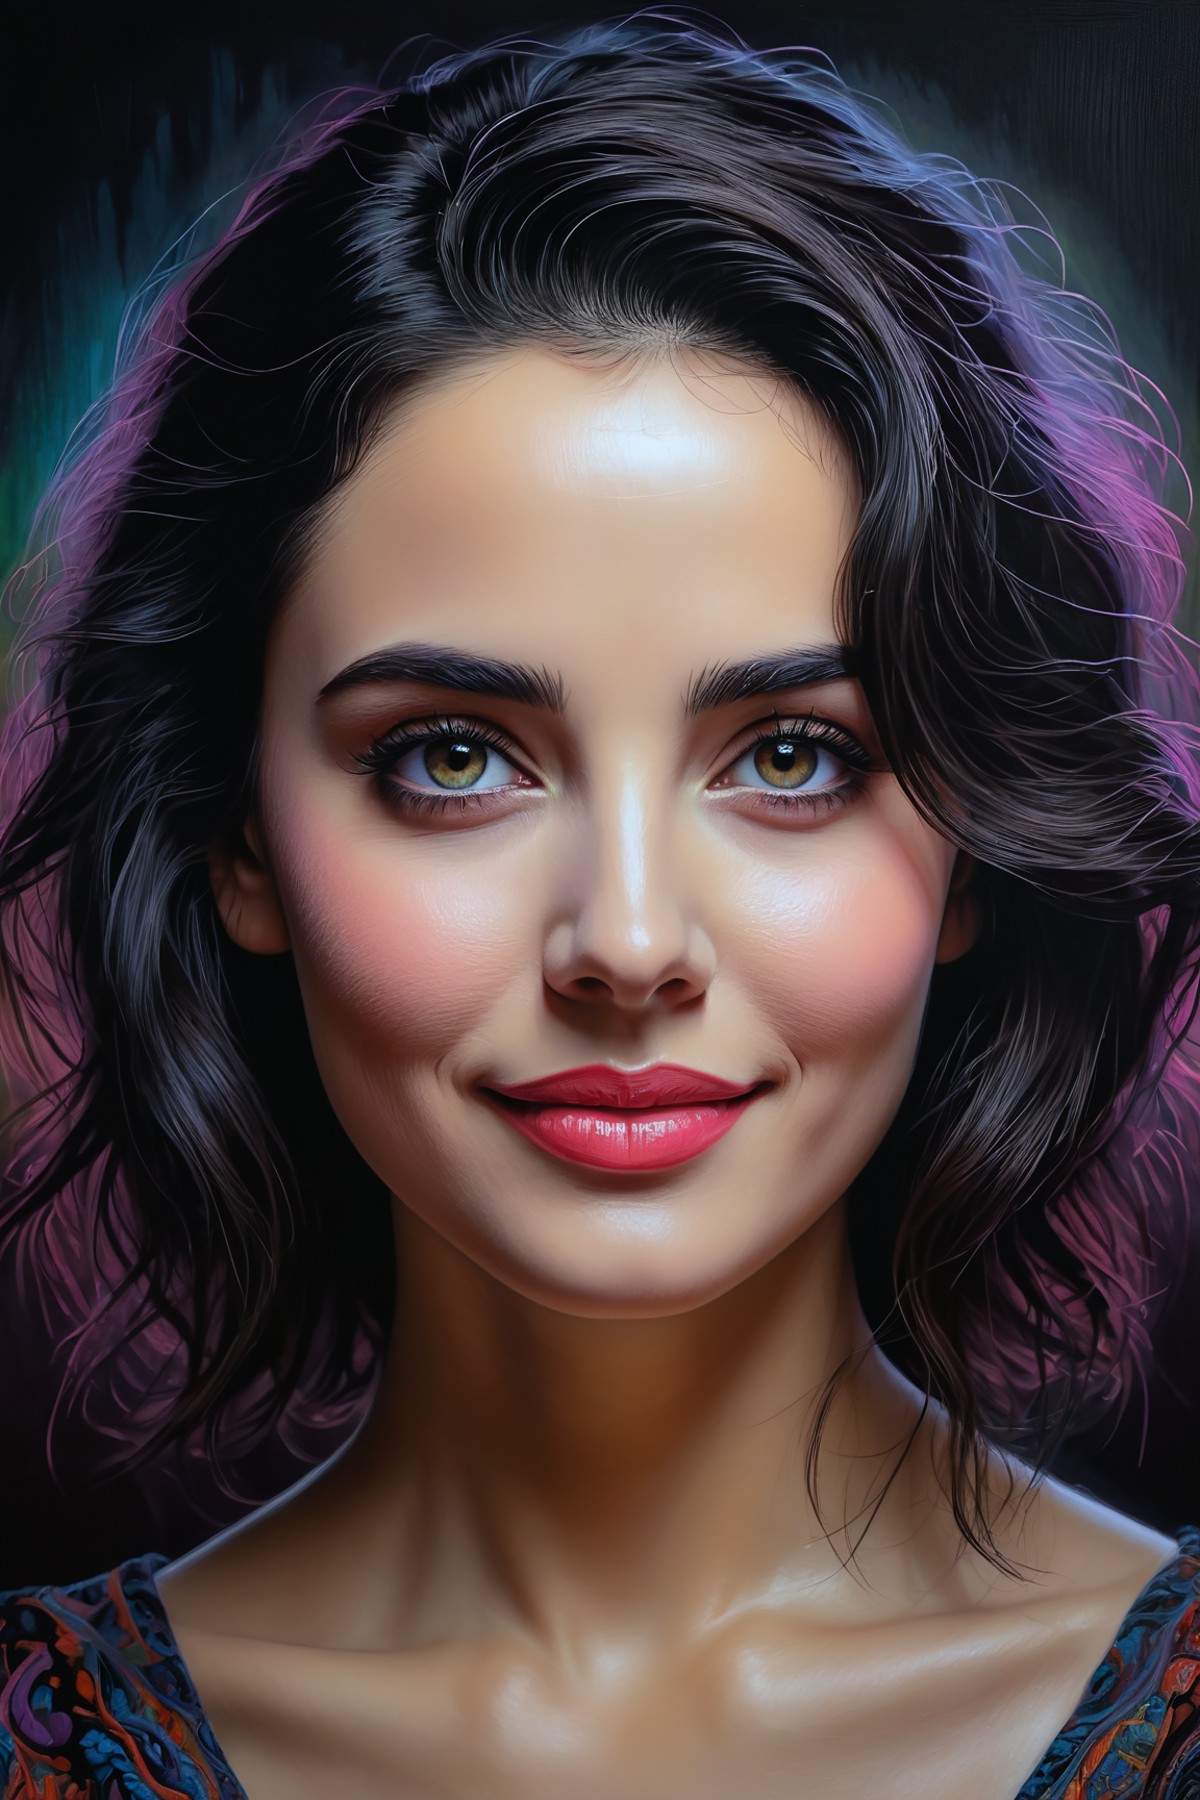 Pastelart, a pastel portrait in expressive style of a ripe attractive, dark hair, dark eyes, a wry smile,mysterious lady, ...